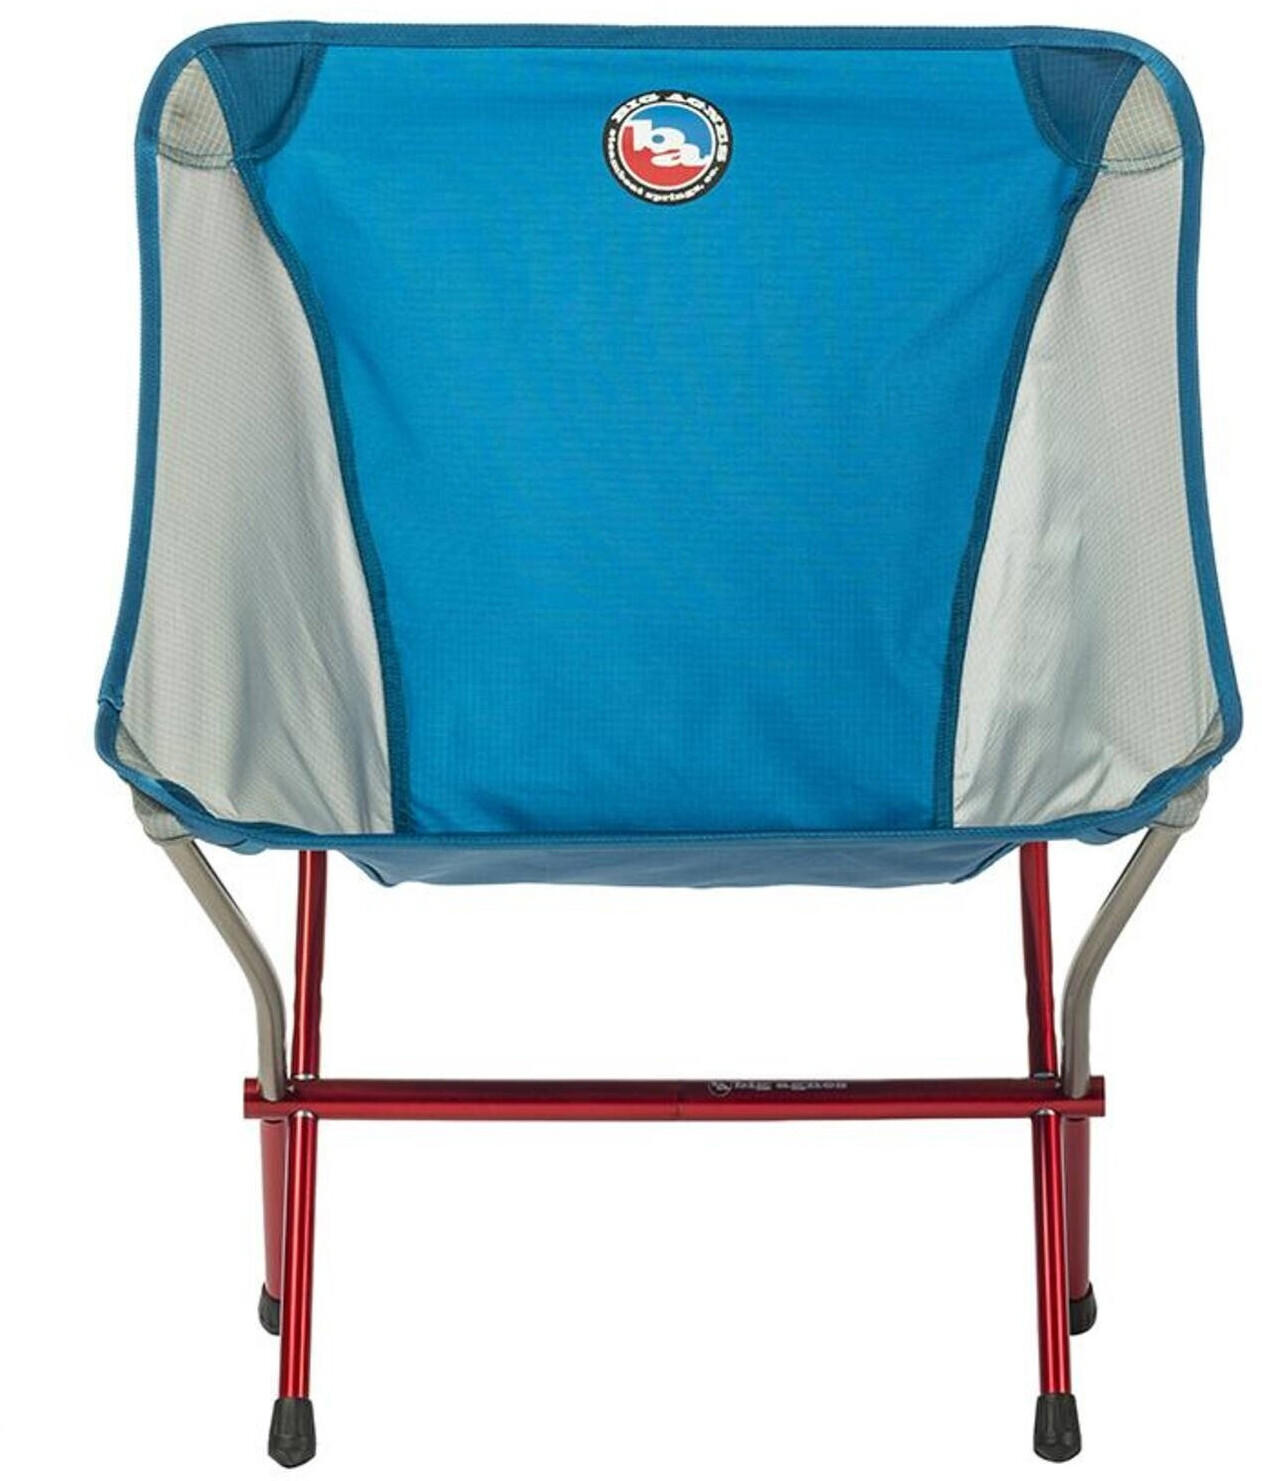 Big Agnes Mica Basin Camp Chair camping chair, blue/grey